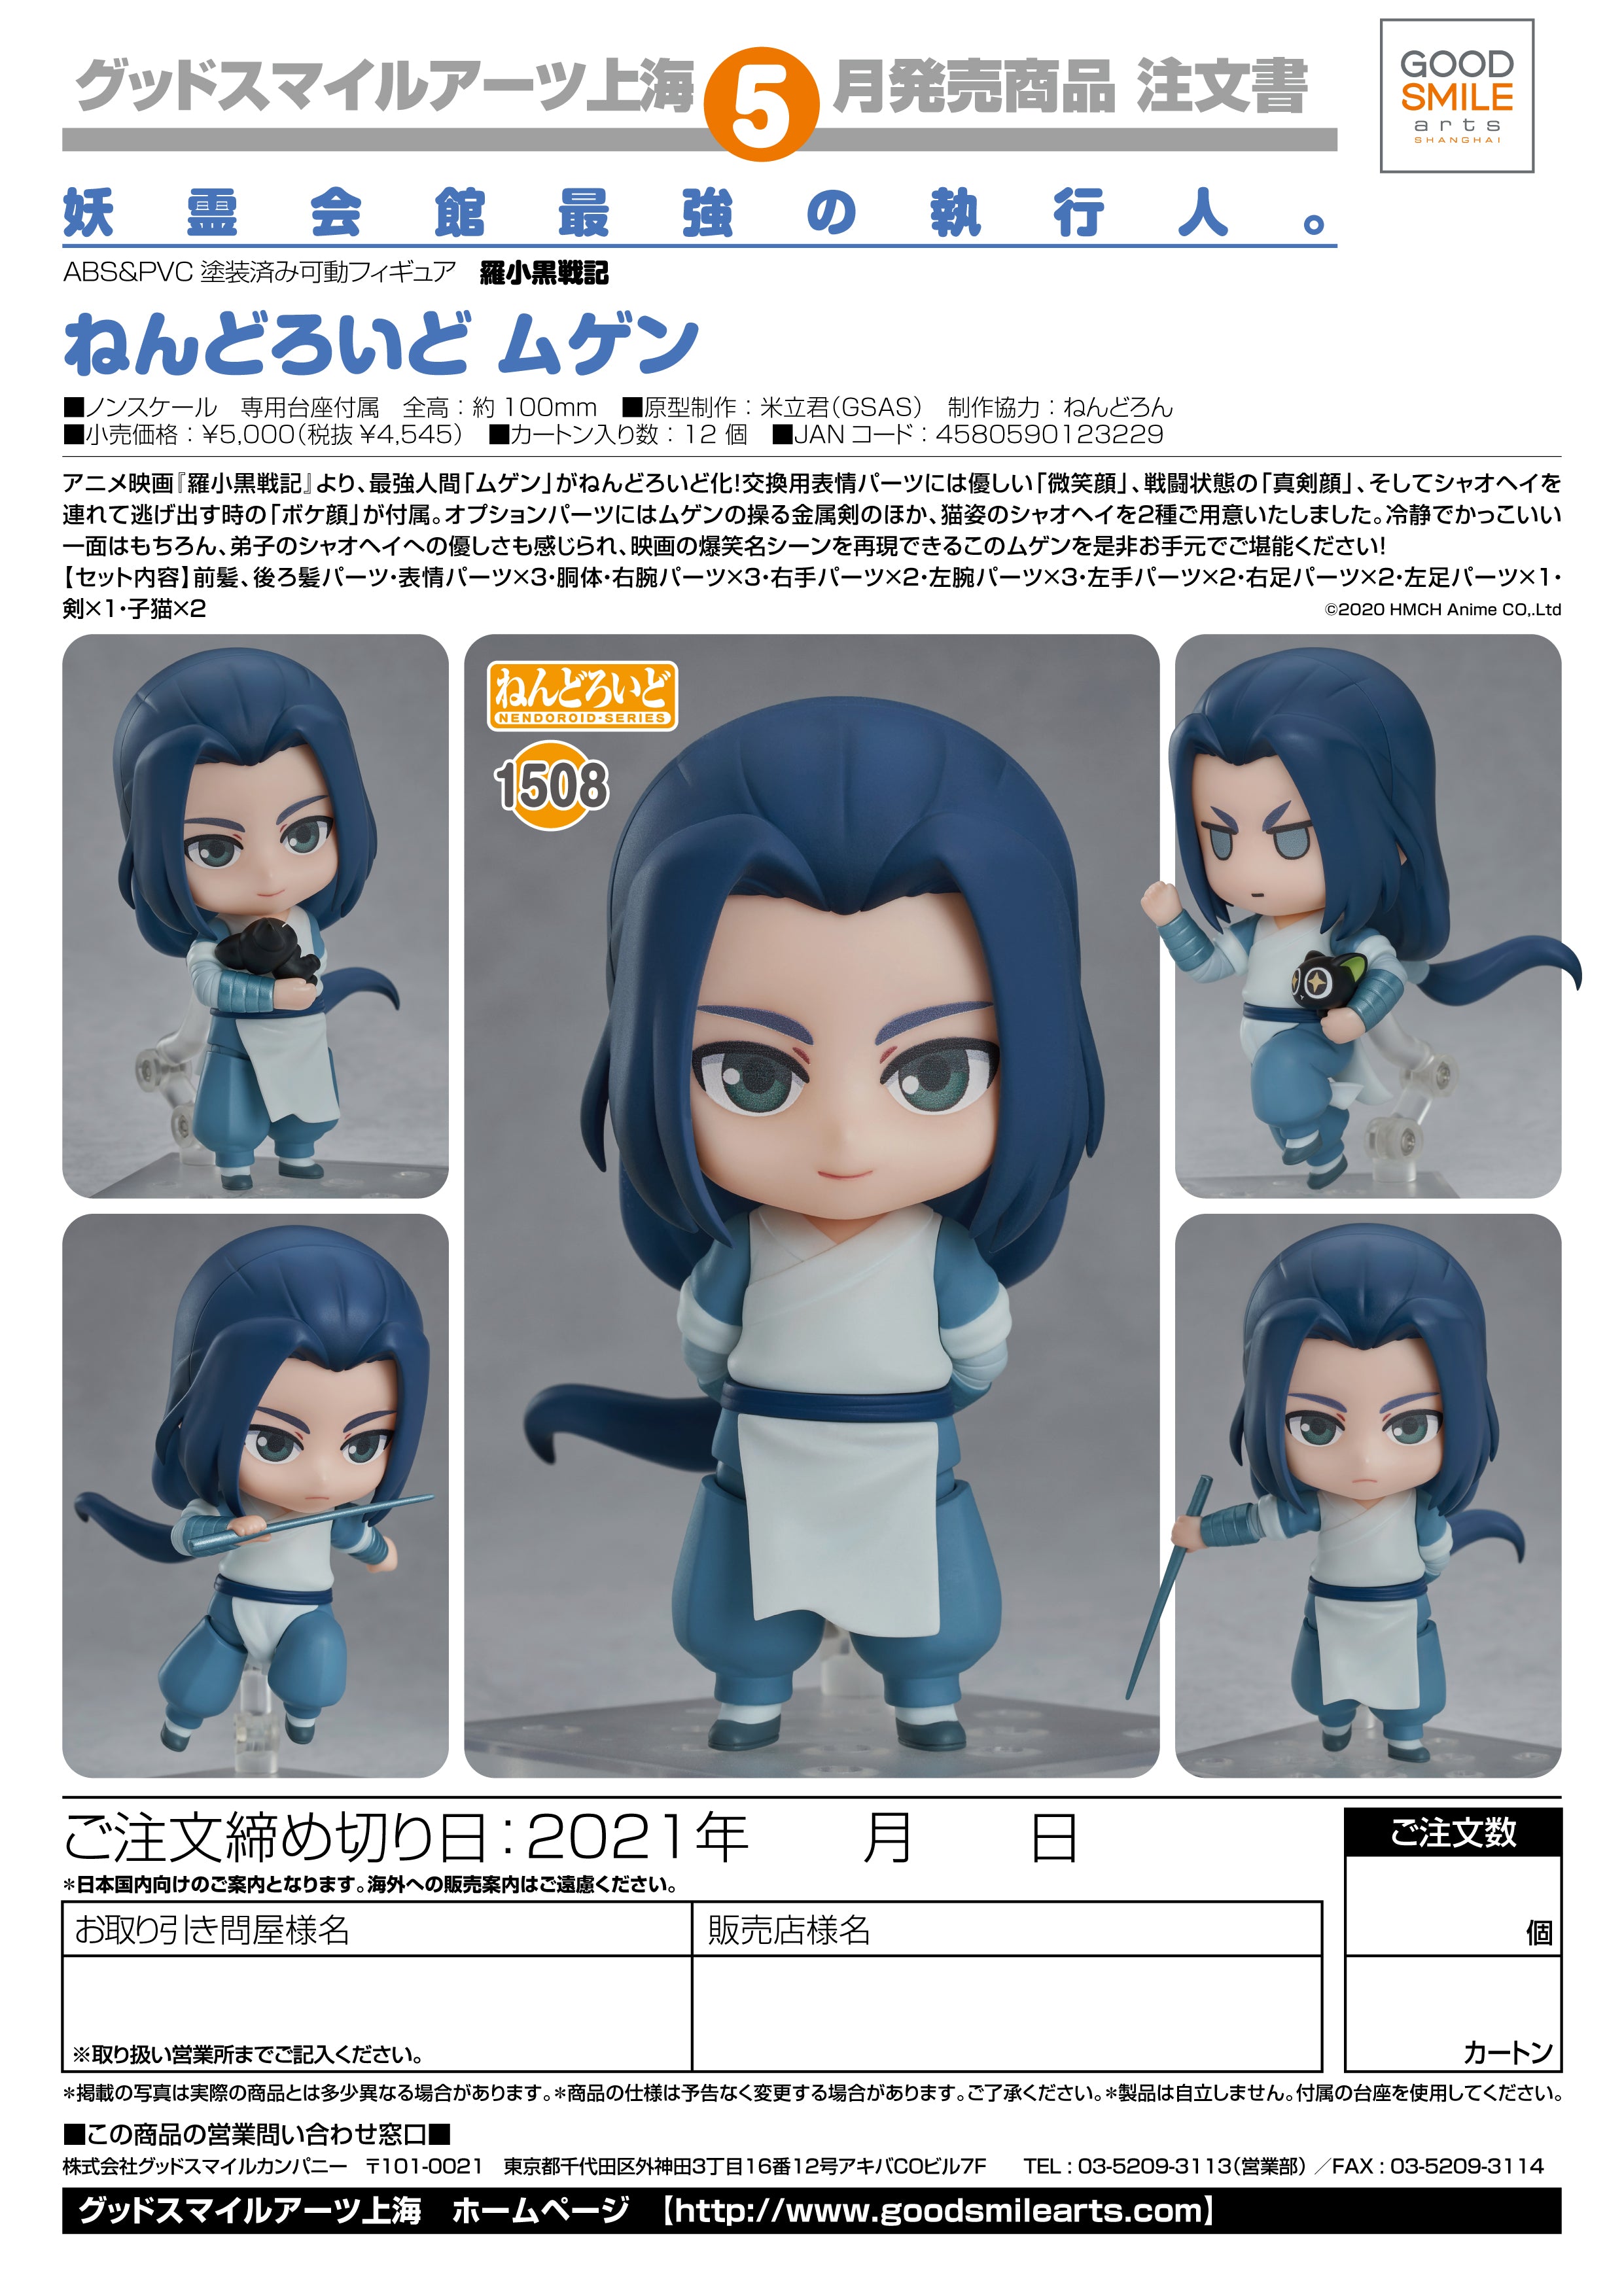 PRE-ORDER Nendoroid 1508 - The Legend of Hei - Wuxian [EXCLUSIVE]